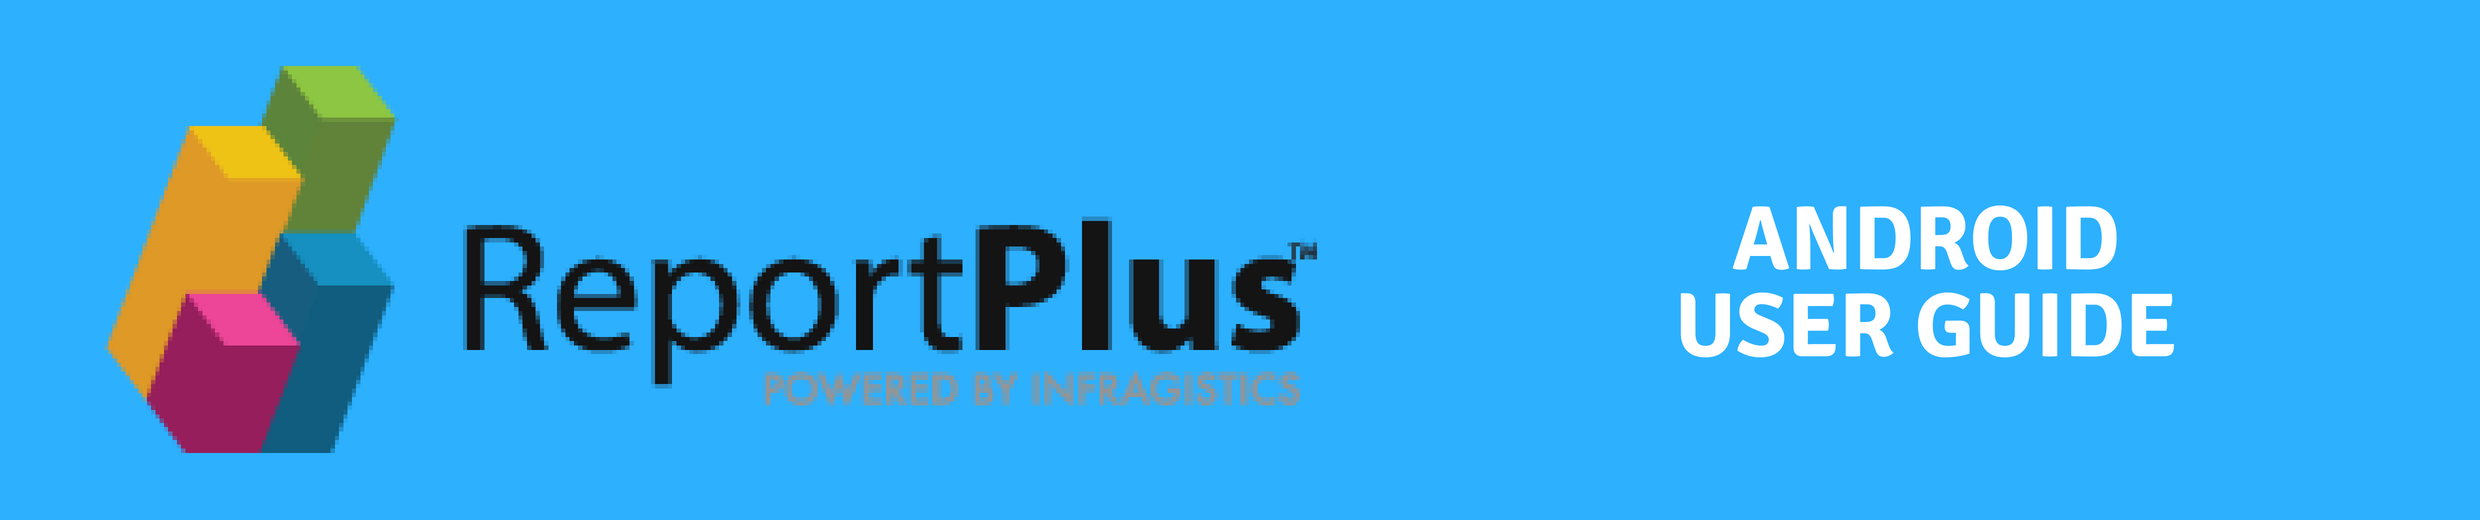 ReportPlus Android User Guide